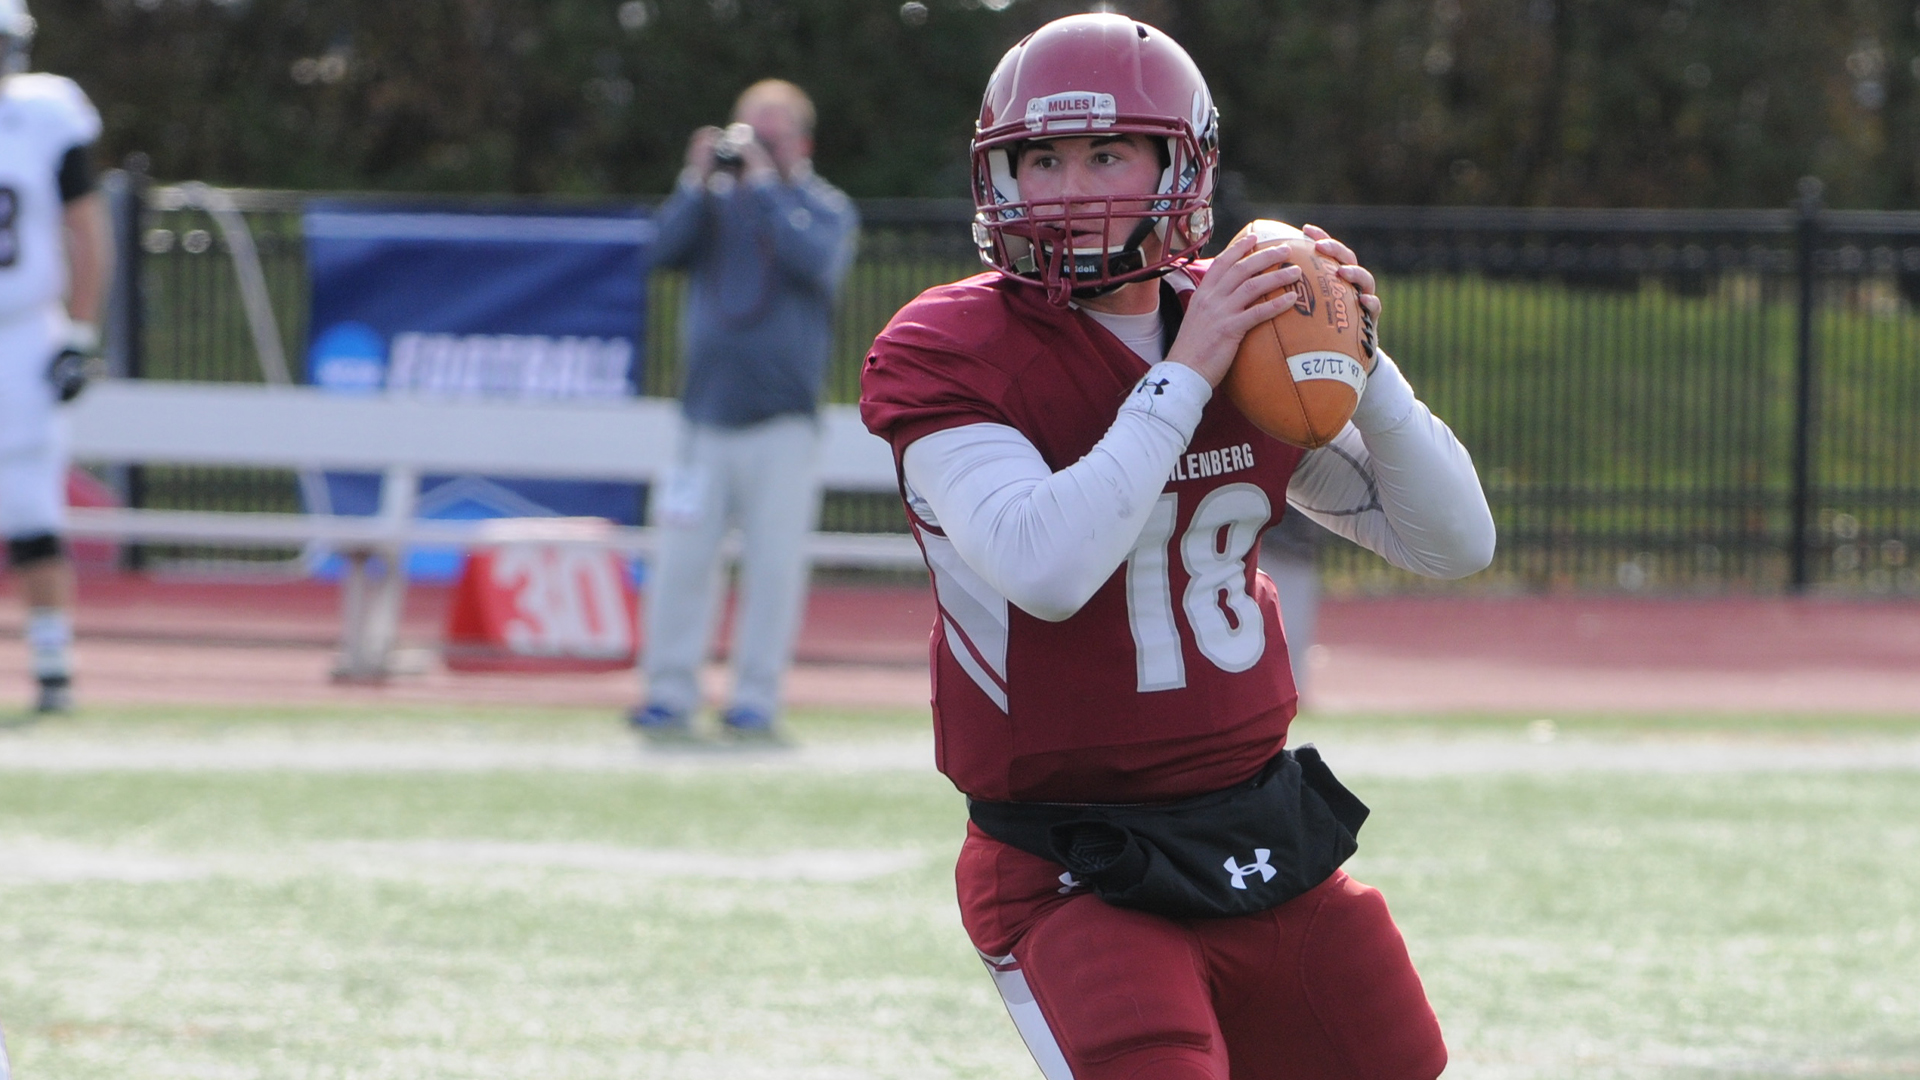 Michael Hnatkowsky, Muhlenberg, Offensive Player of the Year